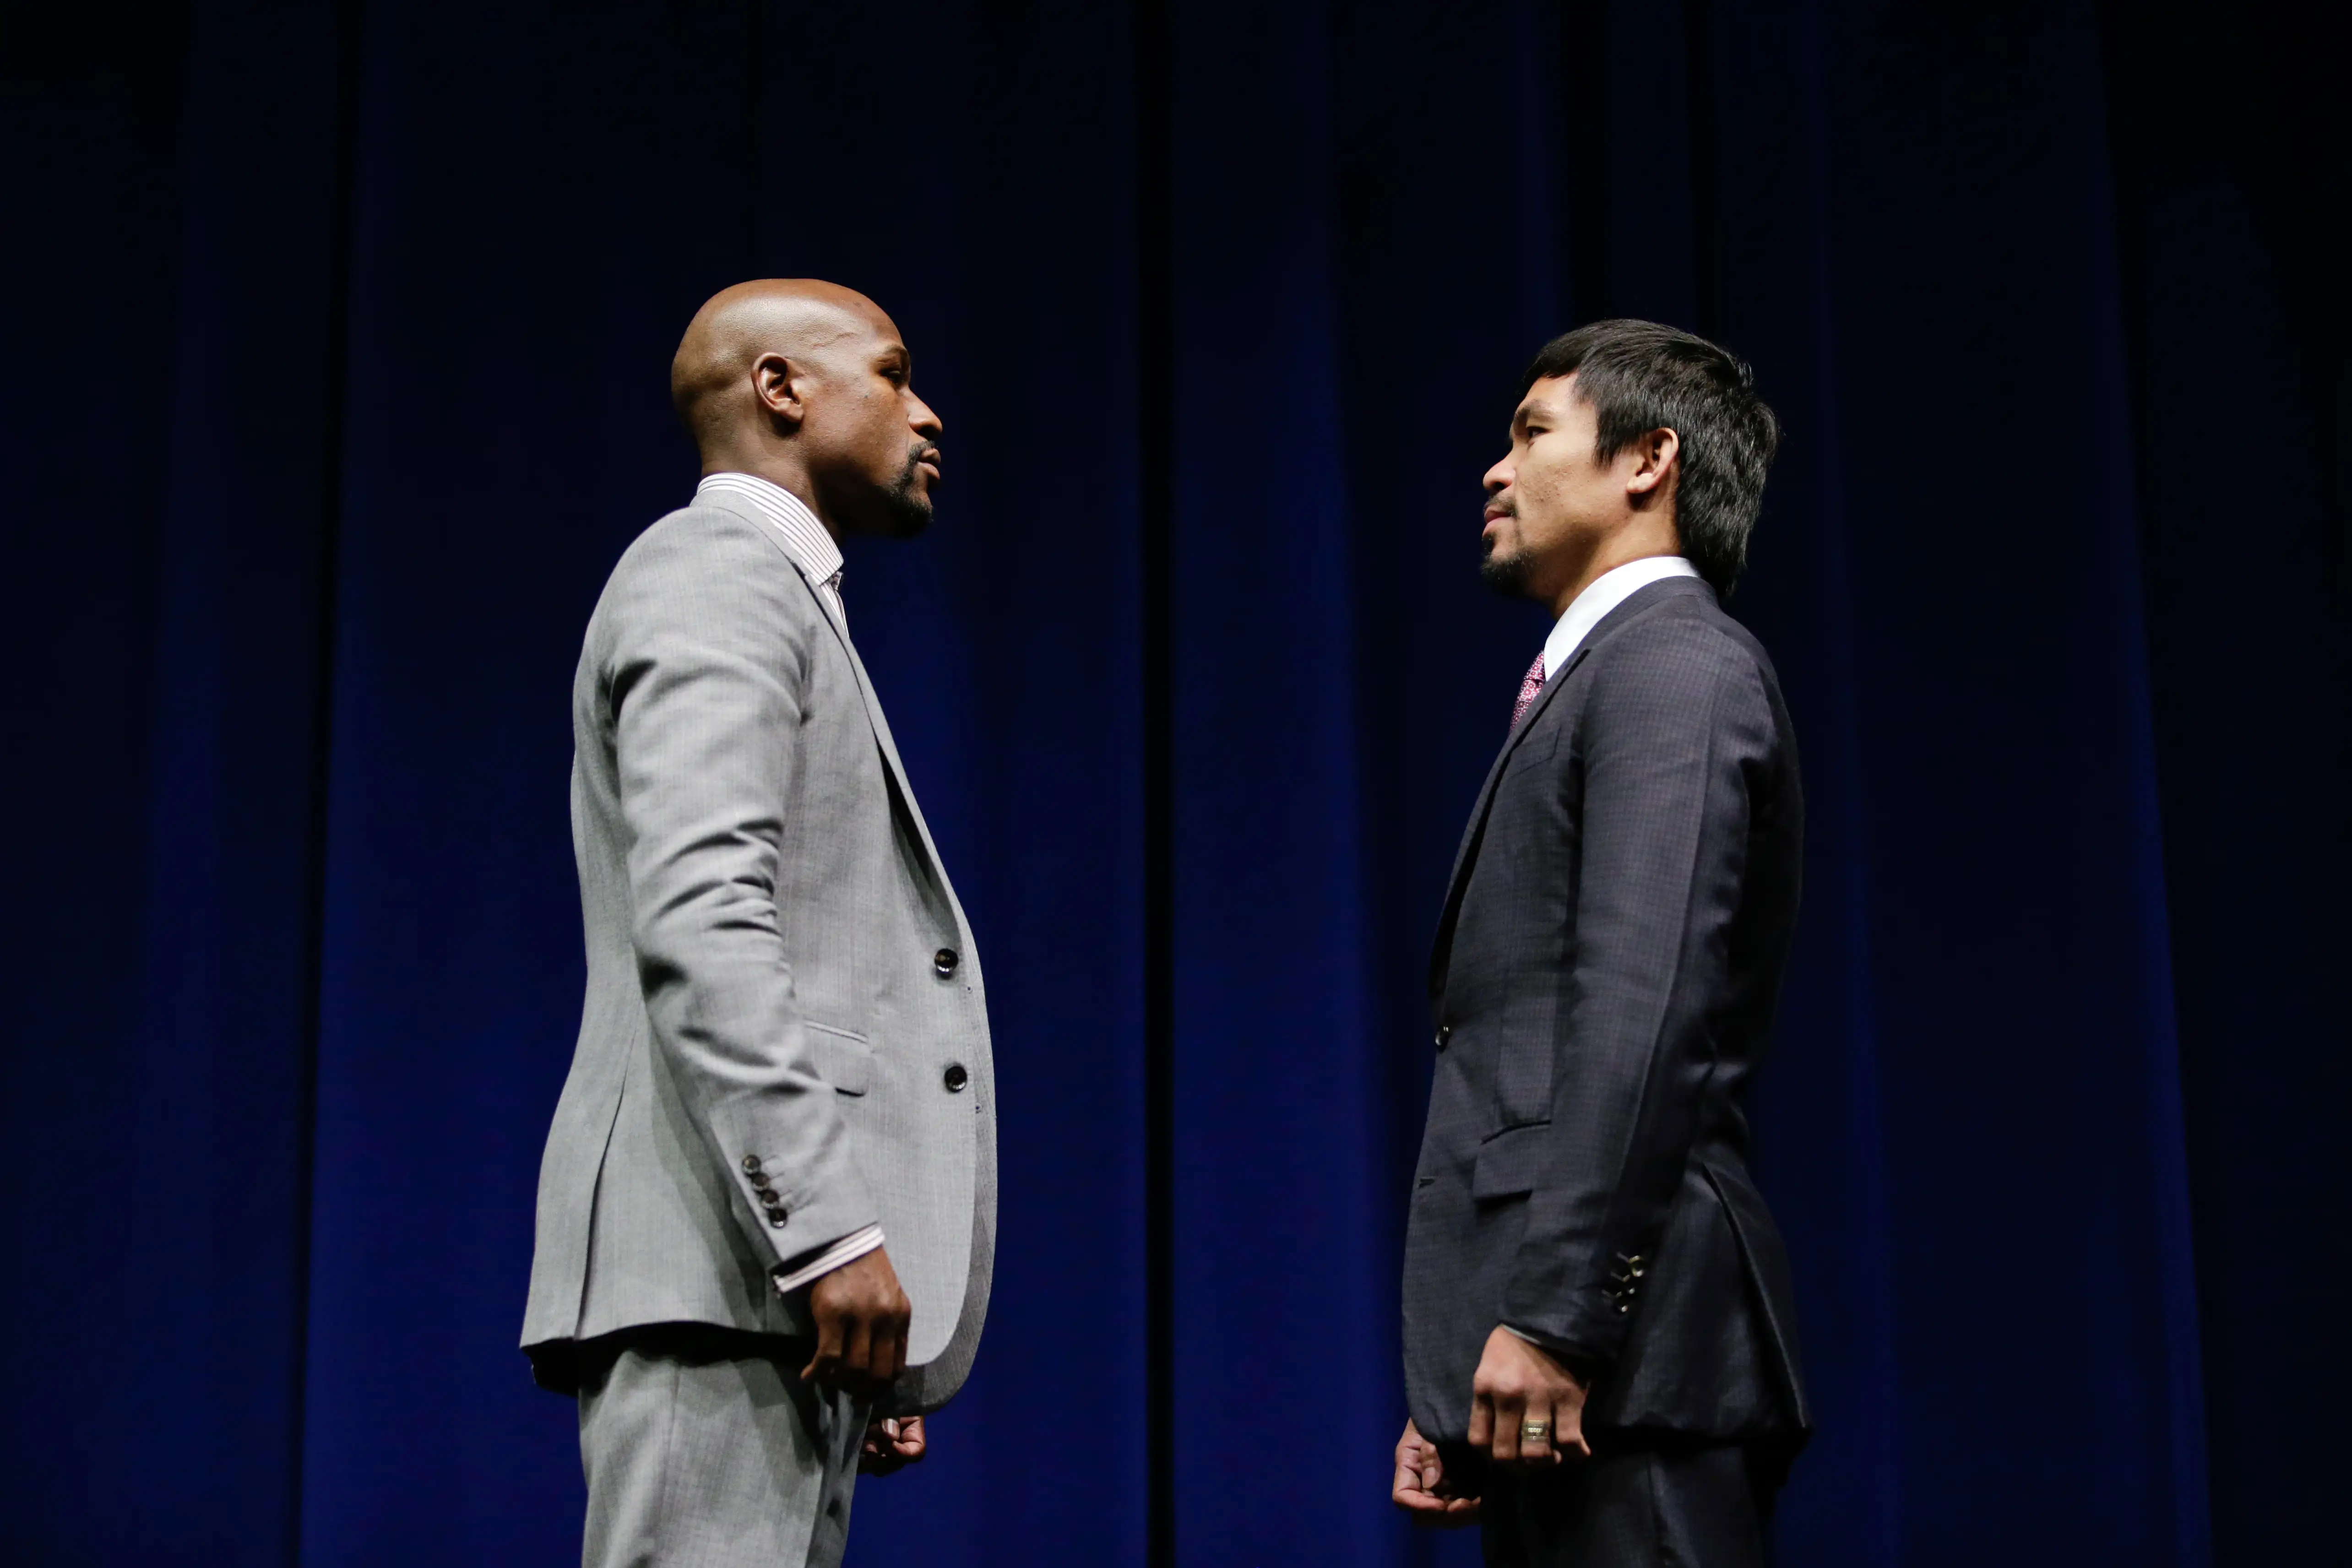 Boxers Floyd Mayweather Jr., left, and Manny Pacquiao, of the Philippines, pose for photos during a news conference, Wednesday, March 11, 2015, in Los Angeles. The two are scheduled to fight in Las Vegas on May 2.